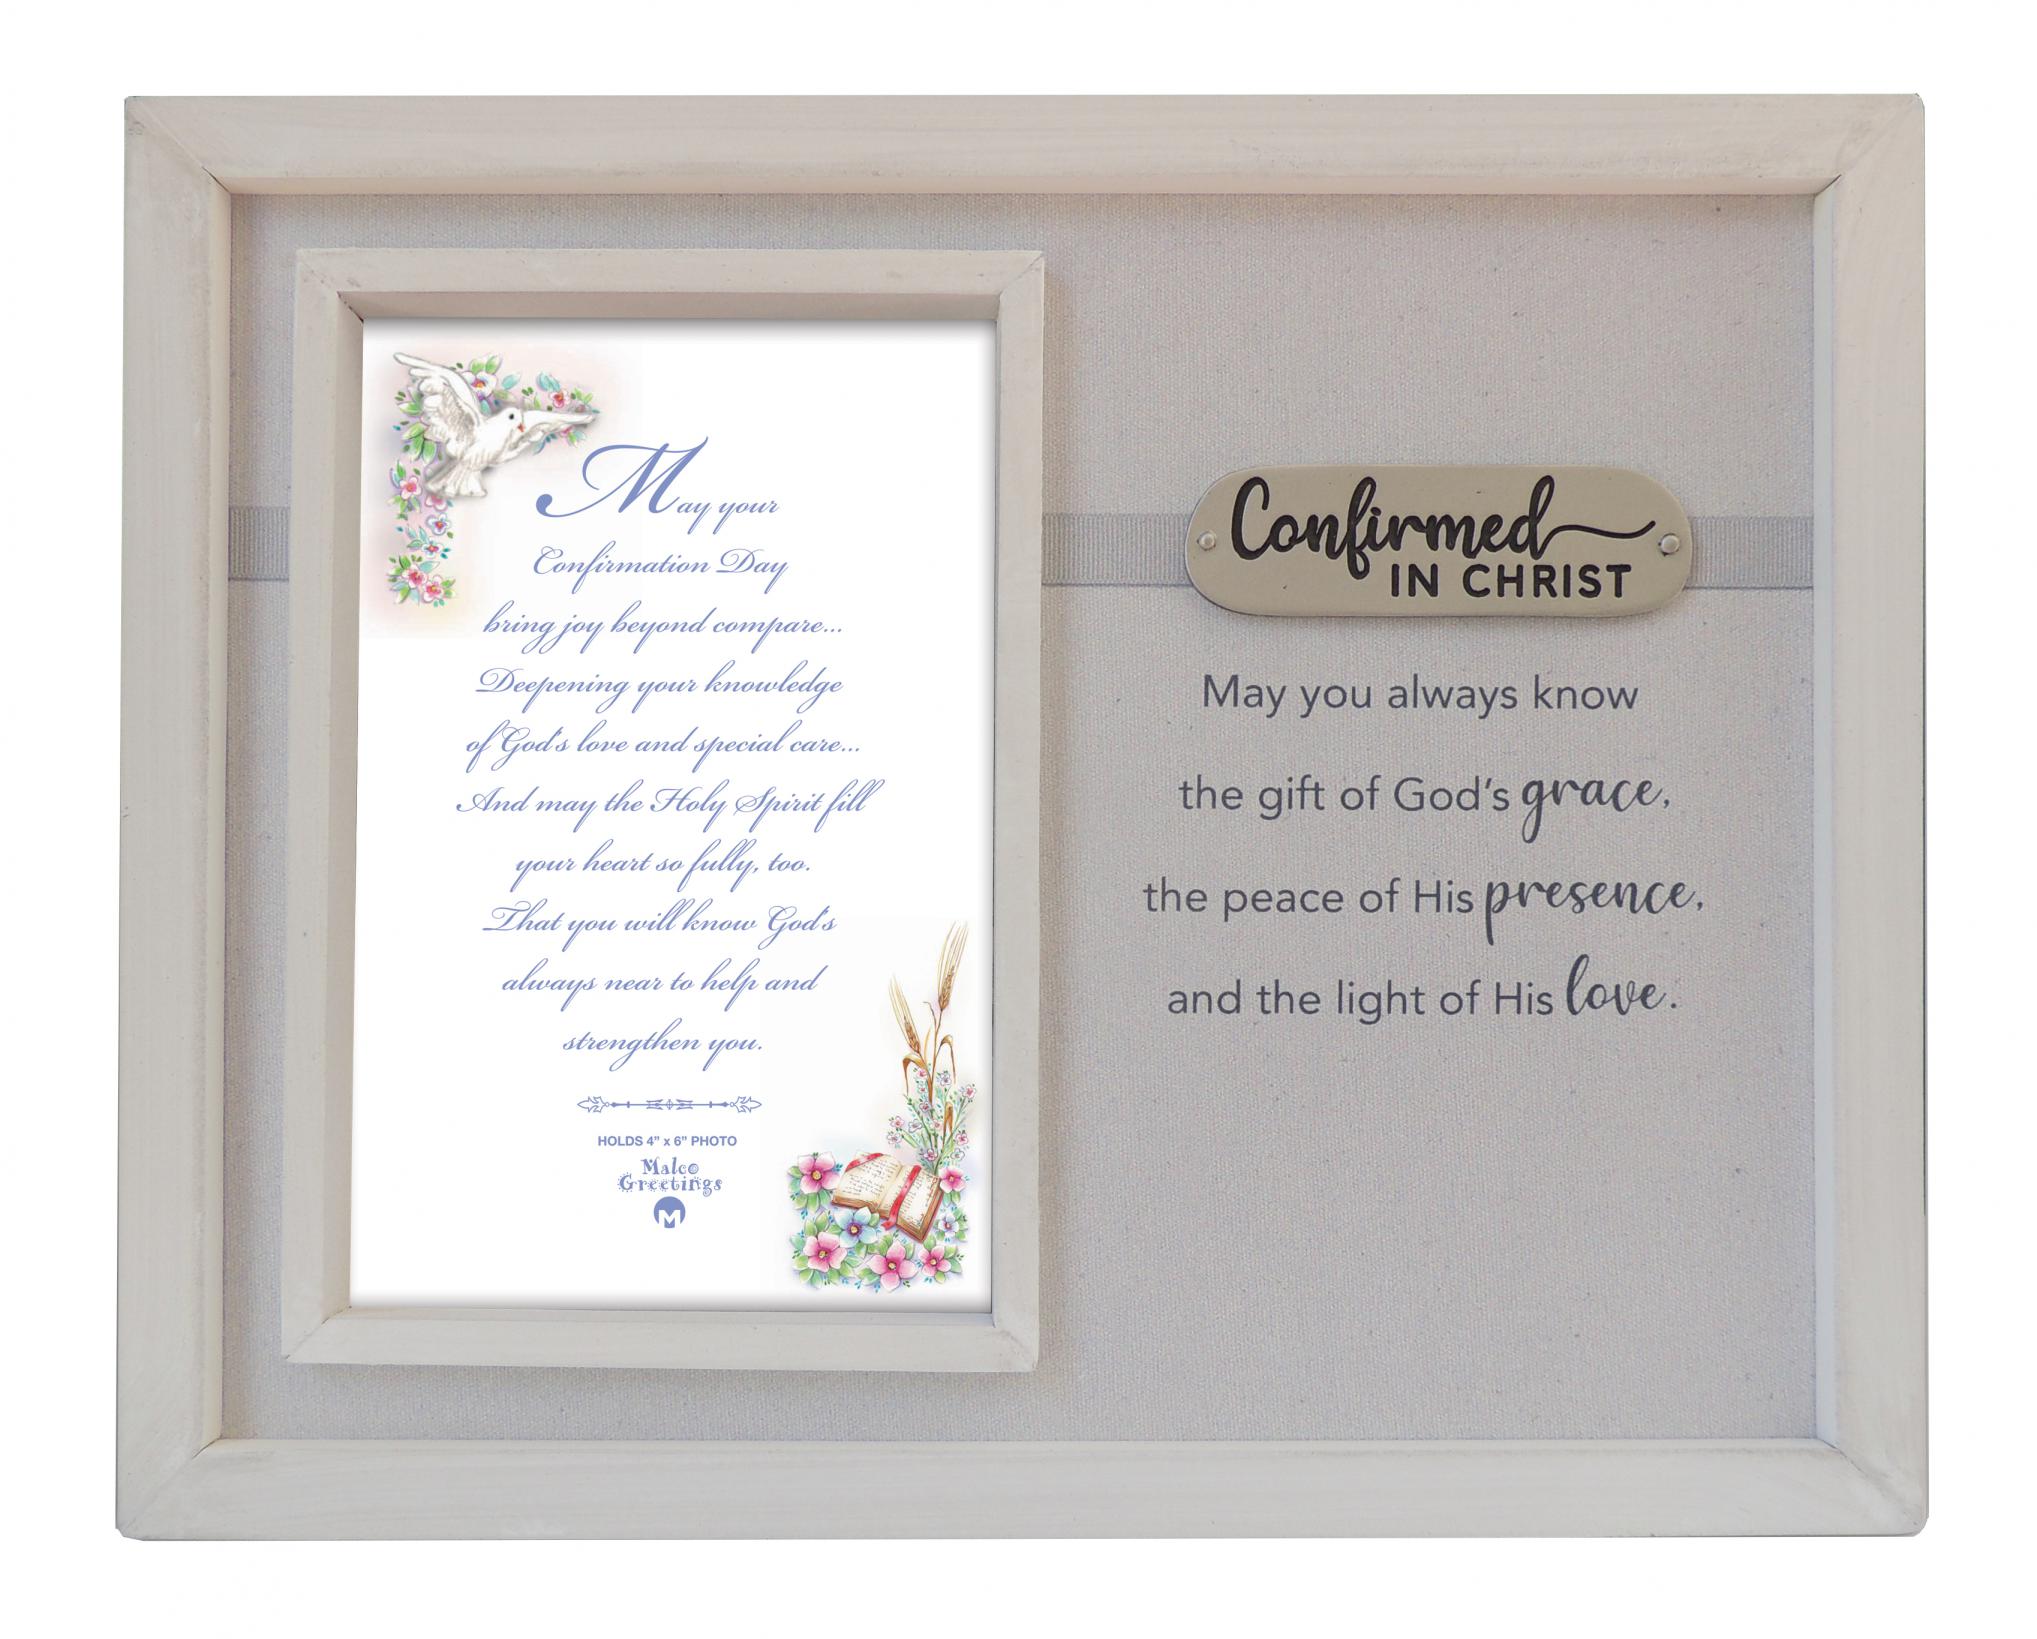 8in x10in Wood Confirmation frame w/brass plate can be personalized - hold 4in x6in photo